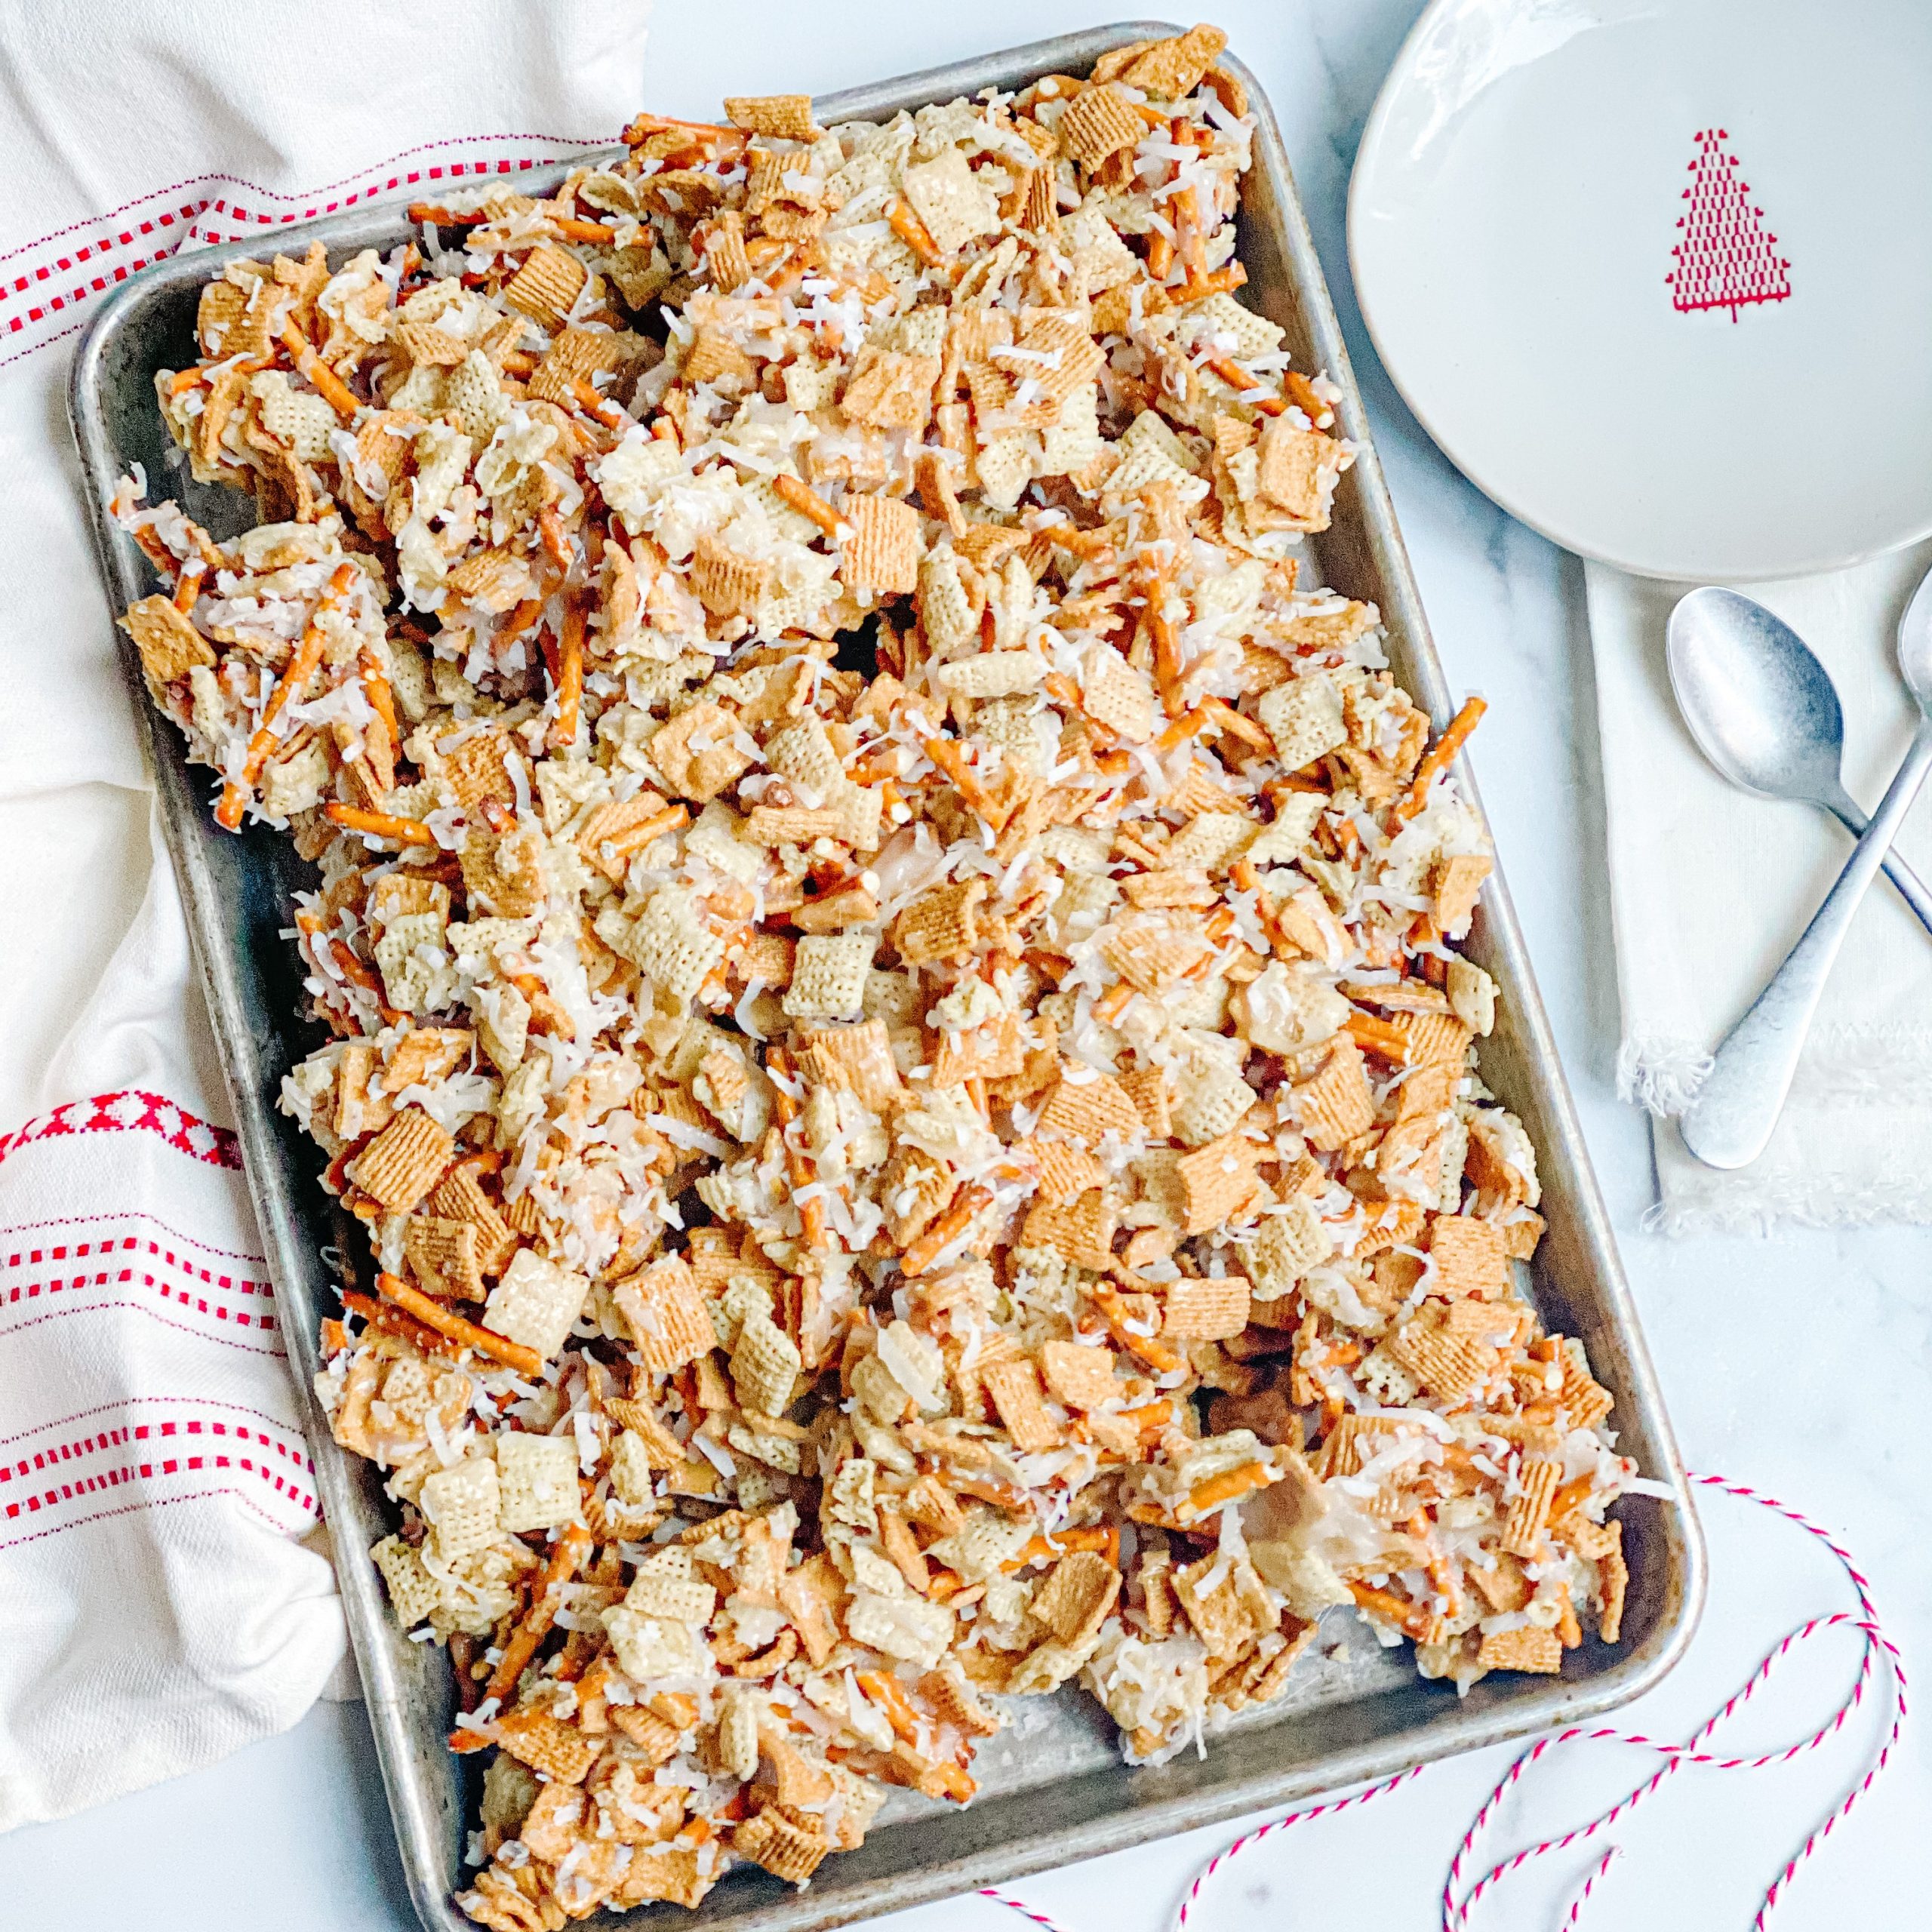 Christmas Crack Recipe Golden Grahams: Step By Step Guide  